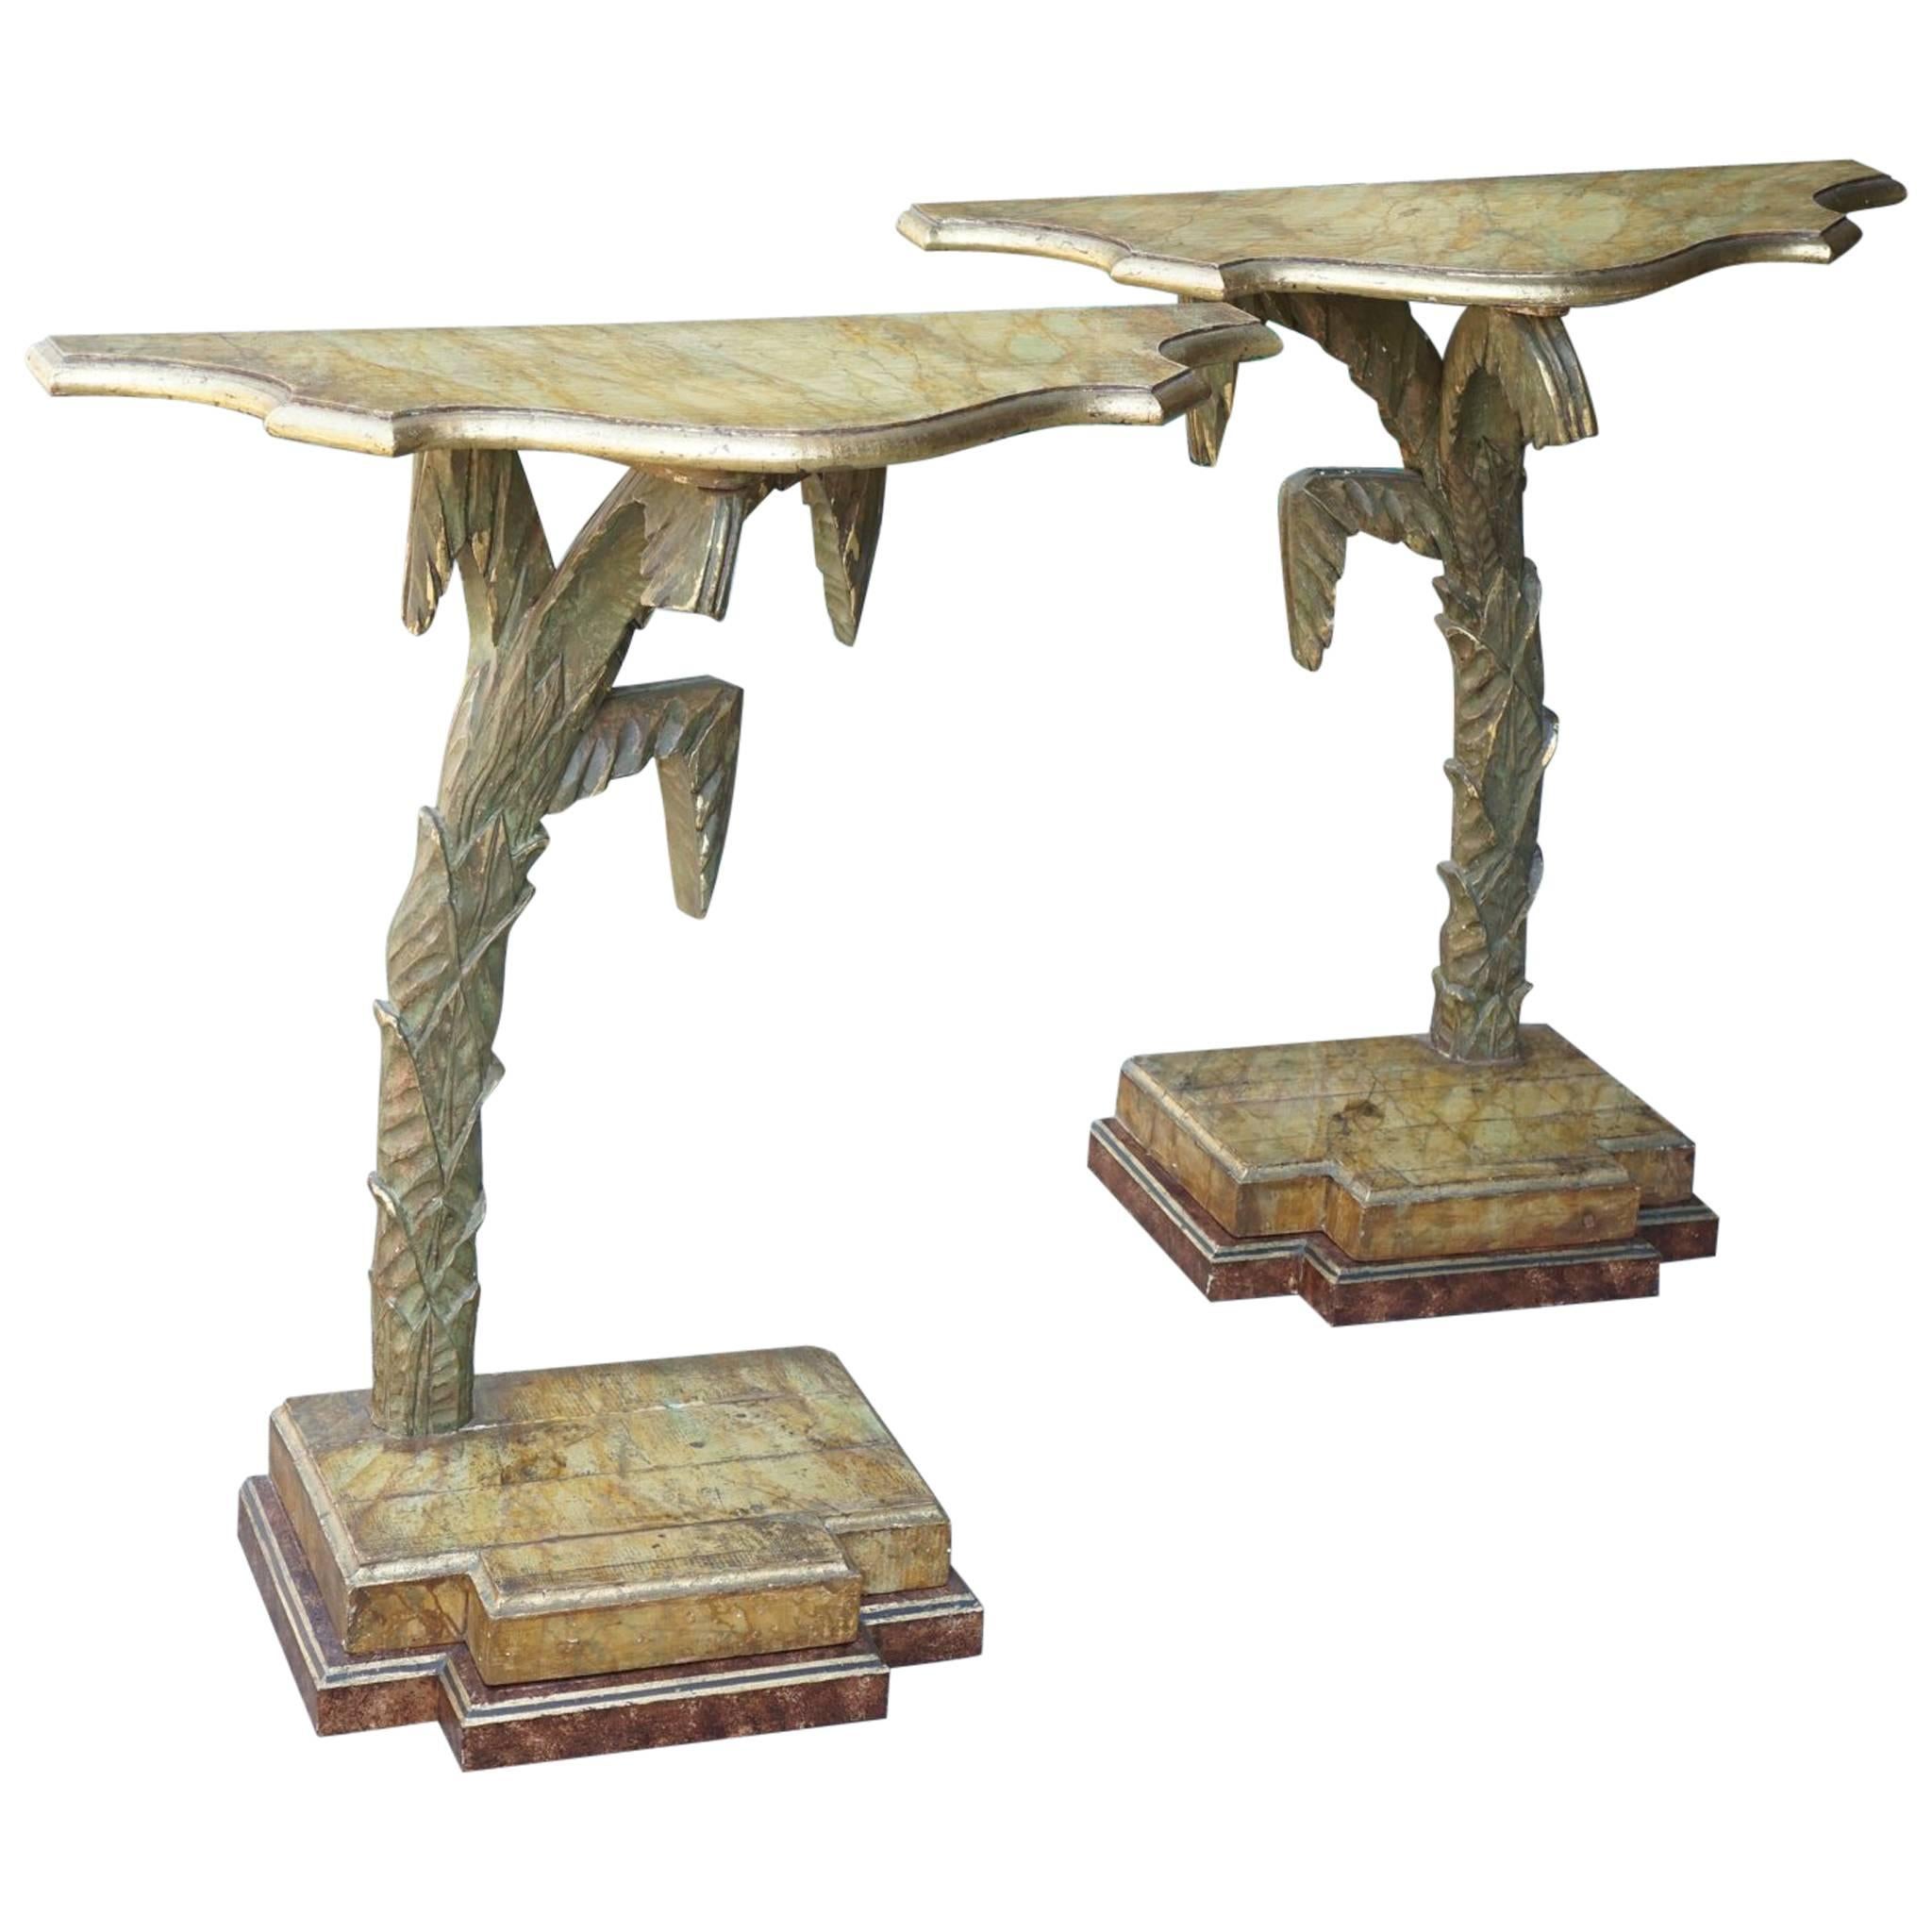 Early 20th Century Italian Console Tables from the Collection of Keith Richards